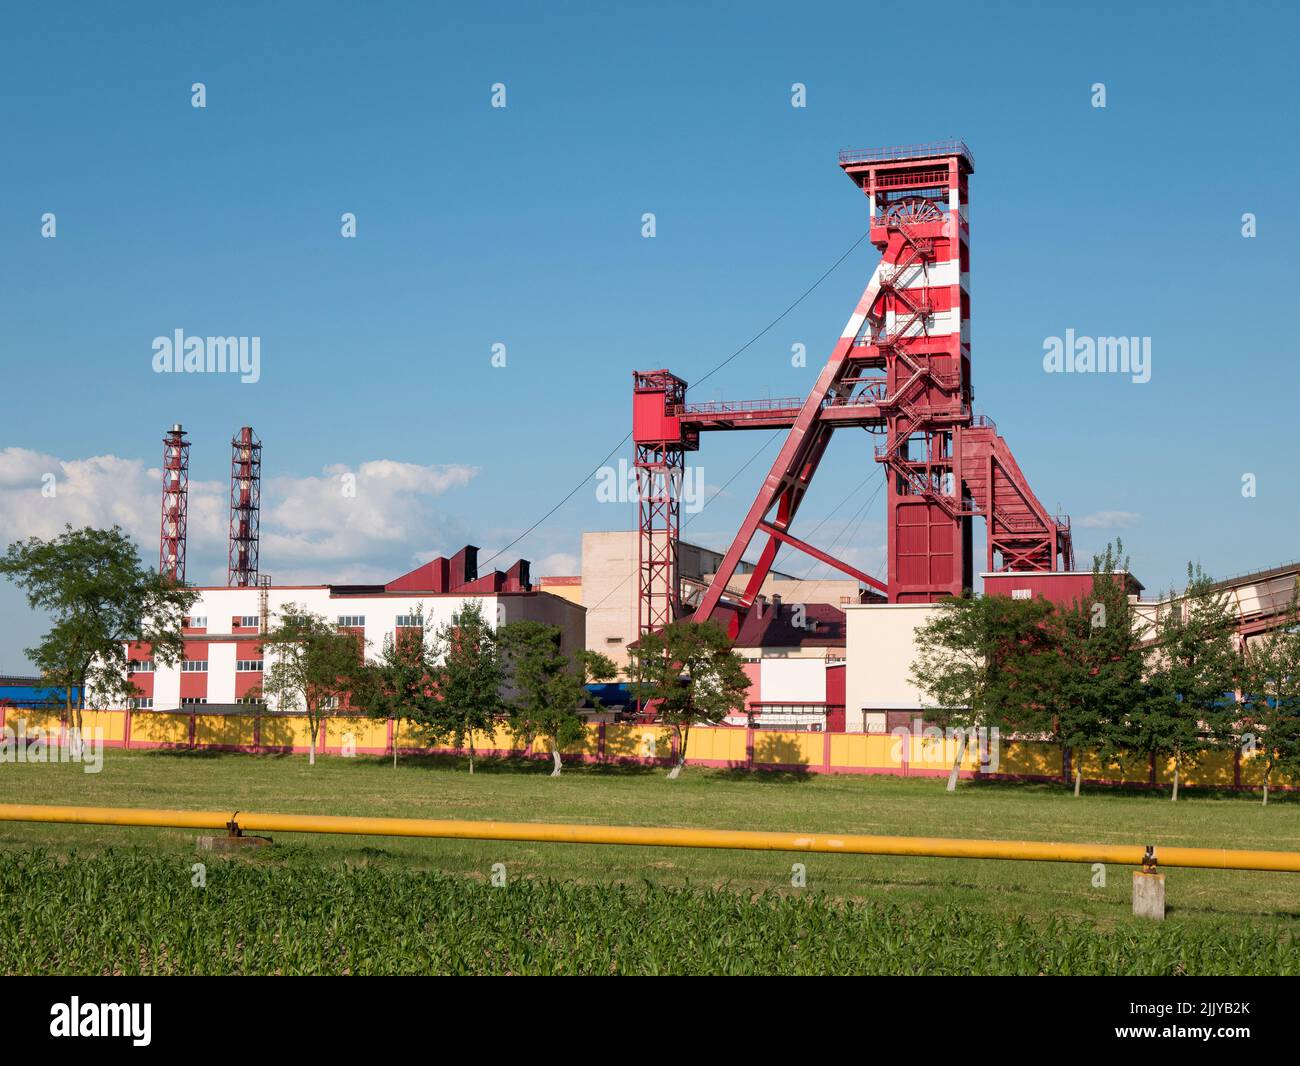 Elevator for raising mineral resources. Mine area with a mine shaft tower, selective focus Stock Photo